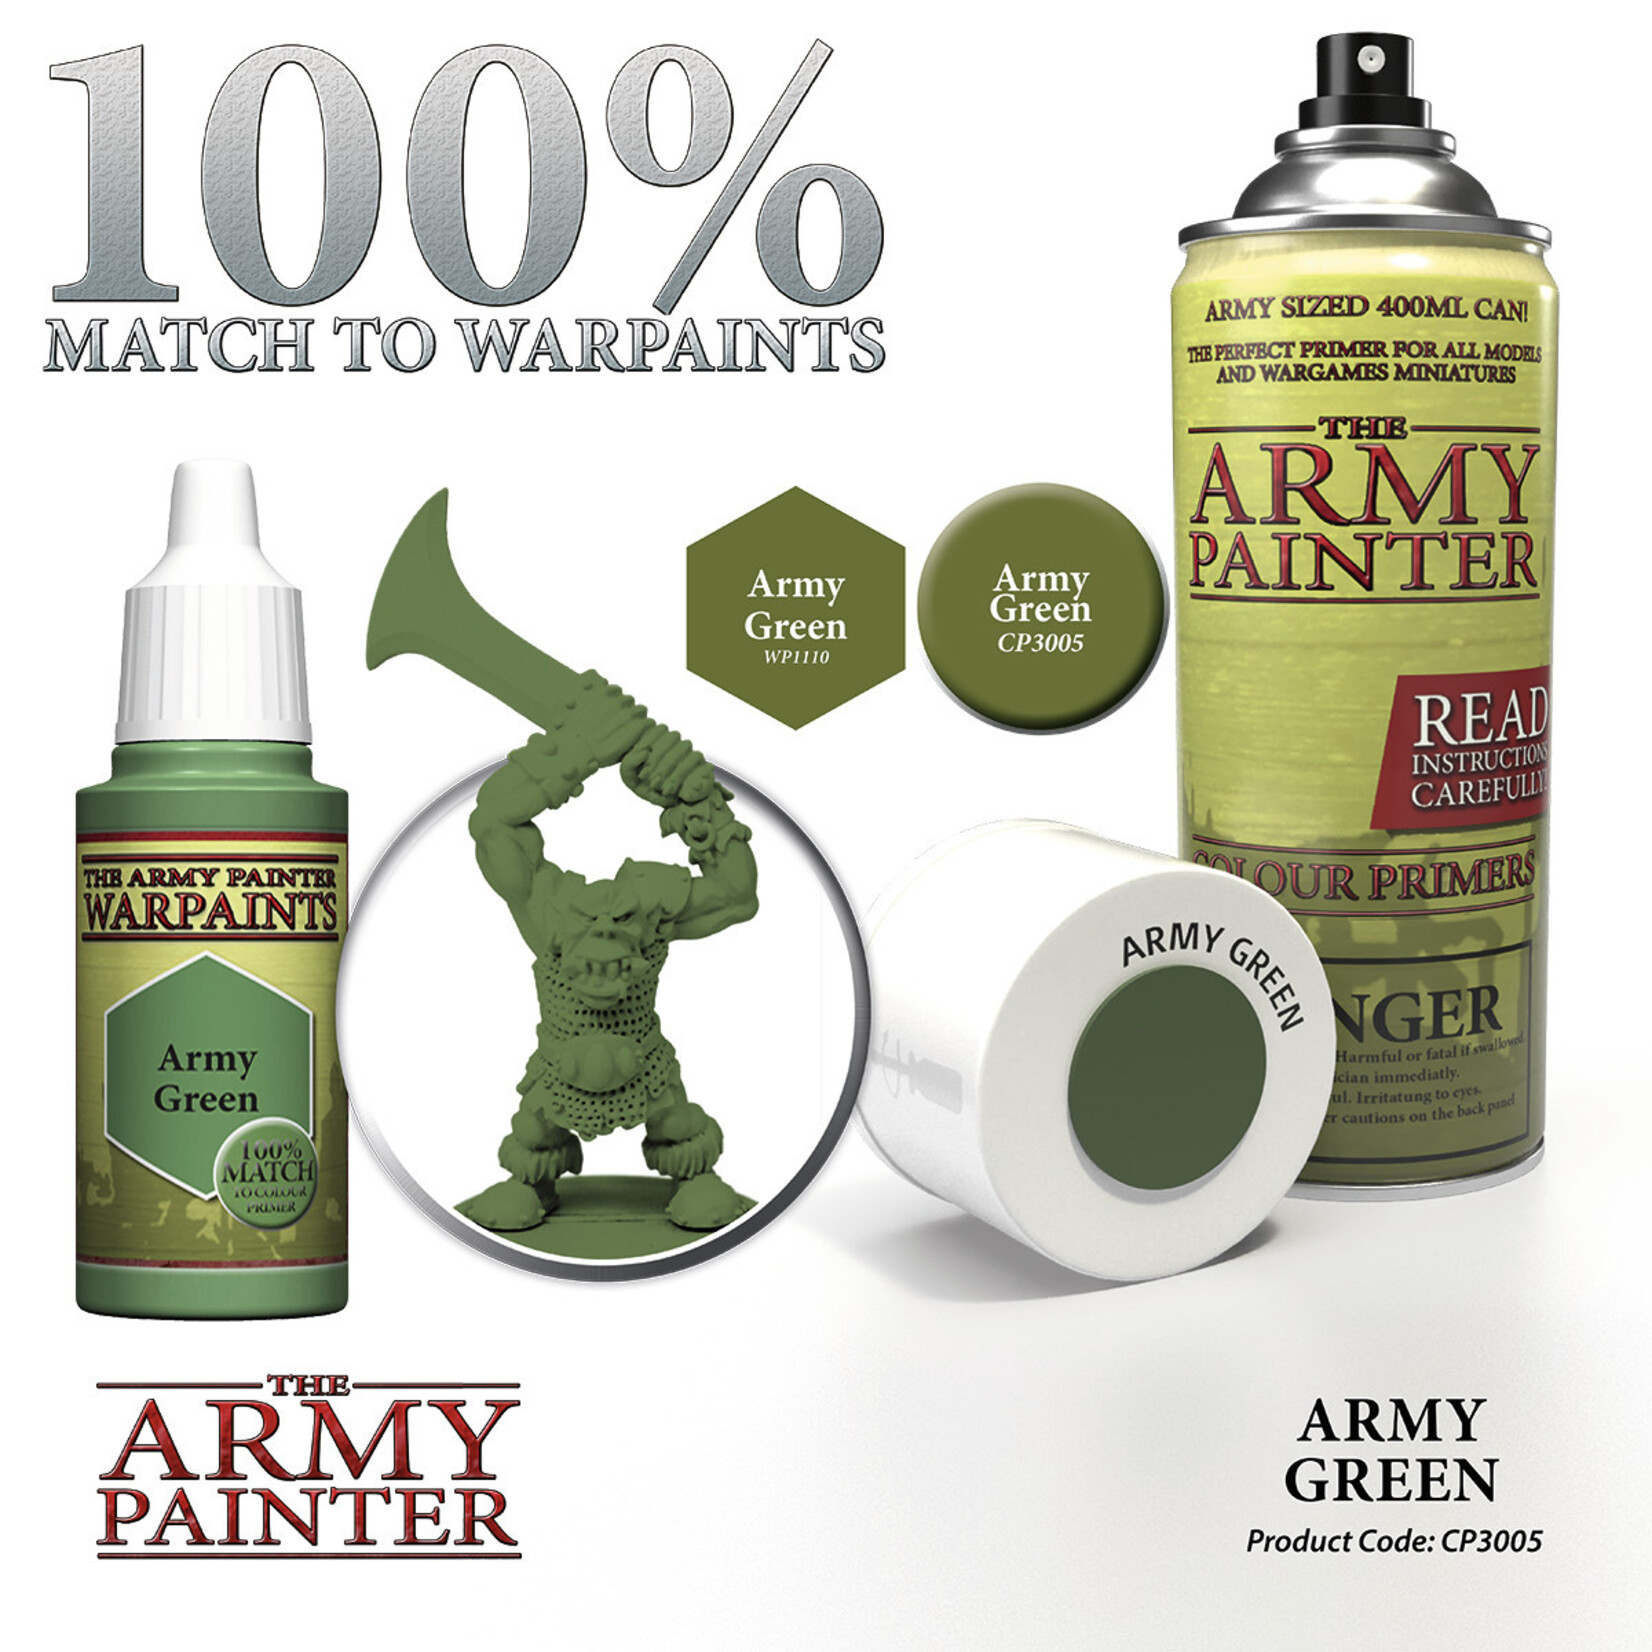 The Army Painter Color Primer Army Green